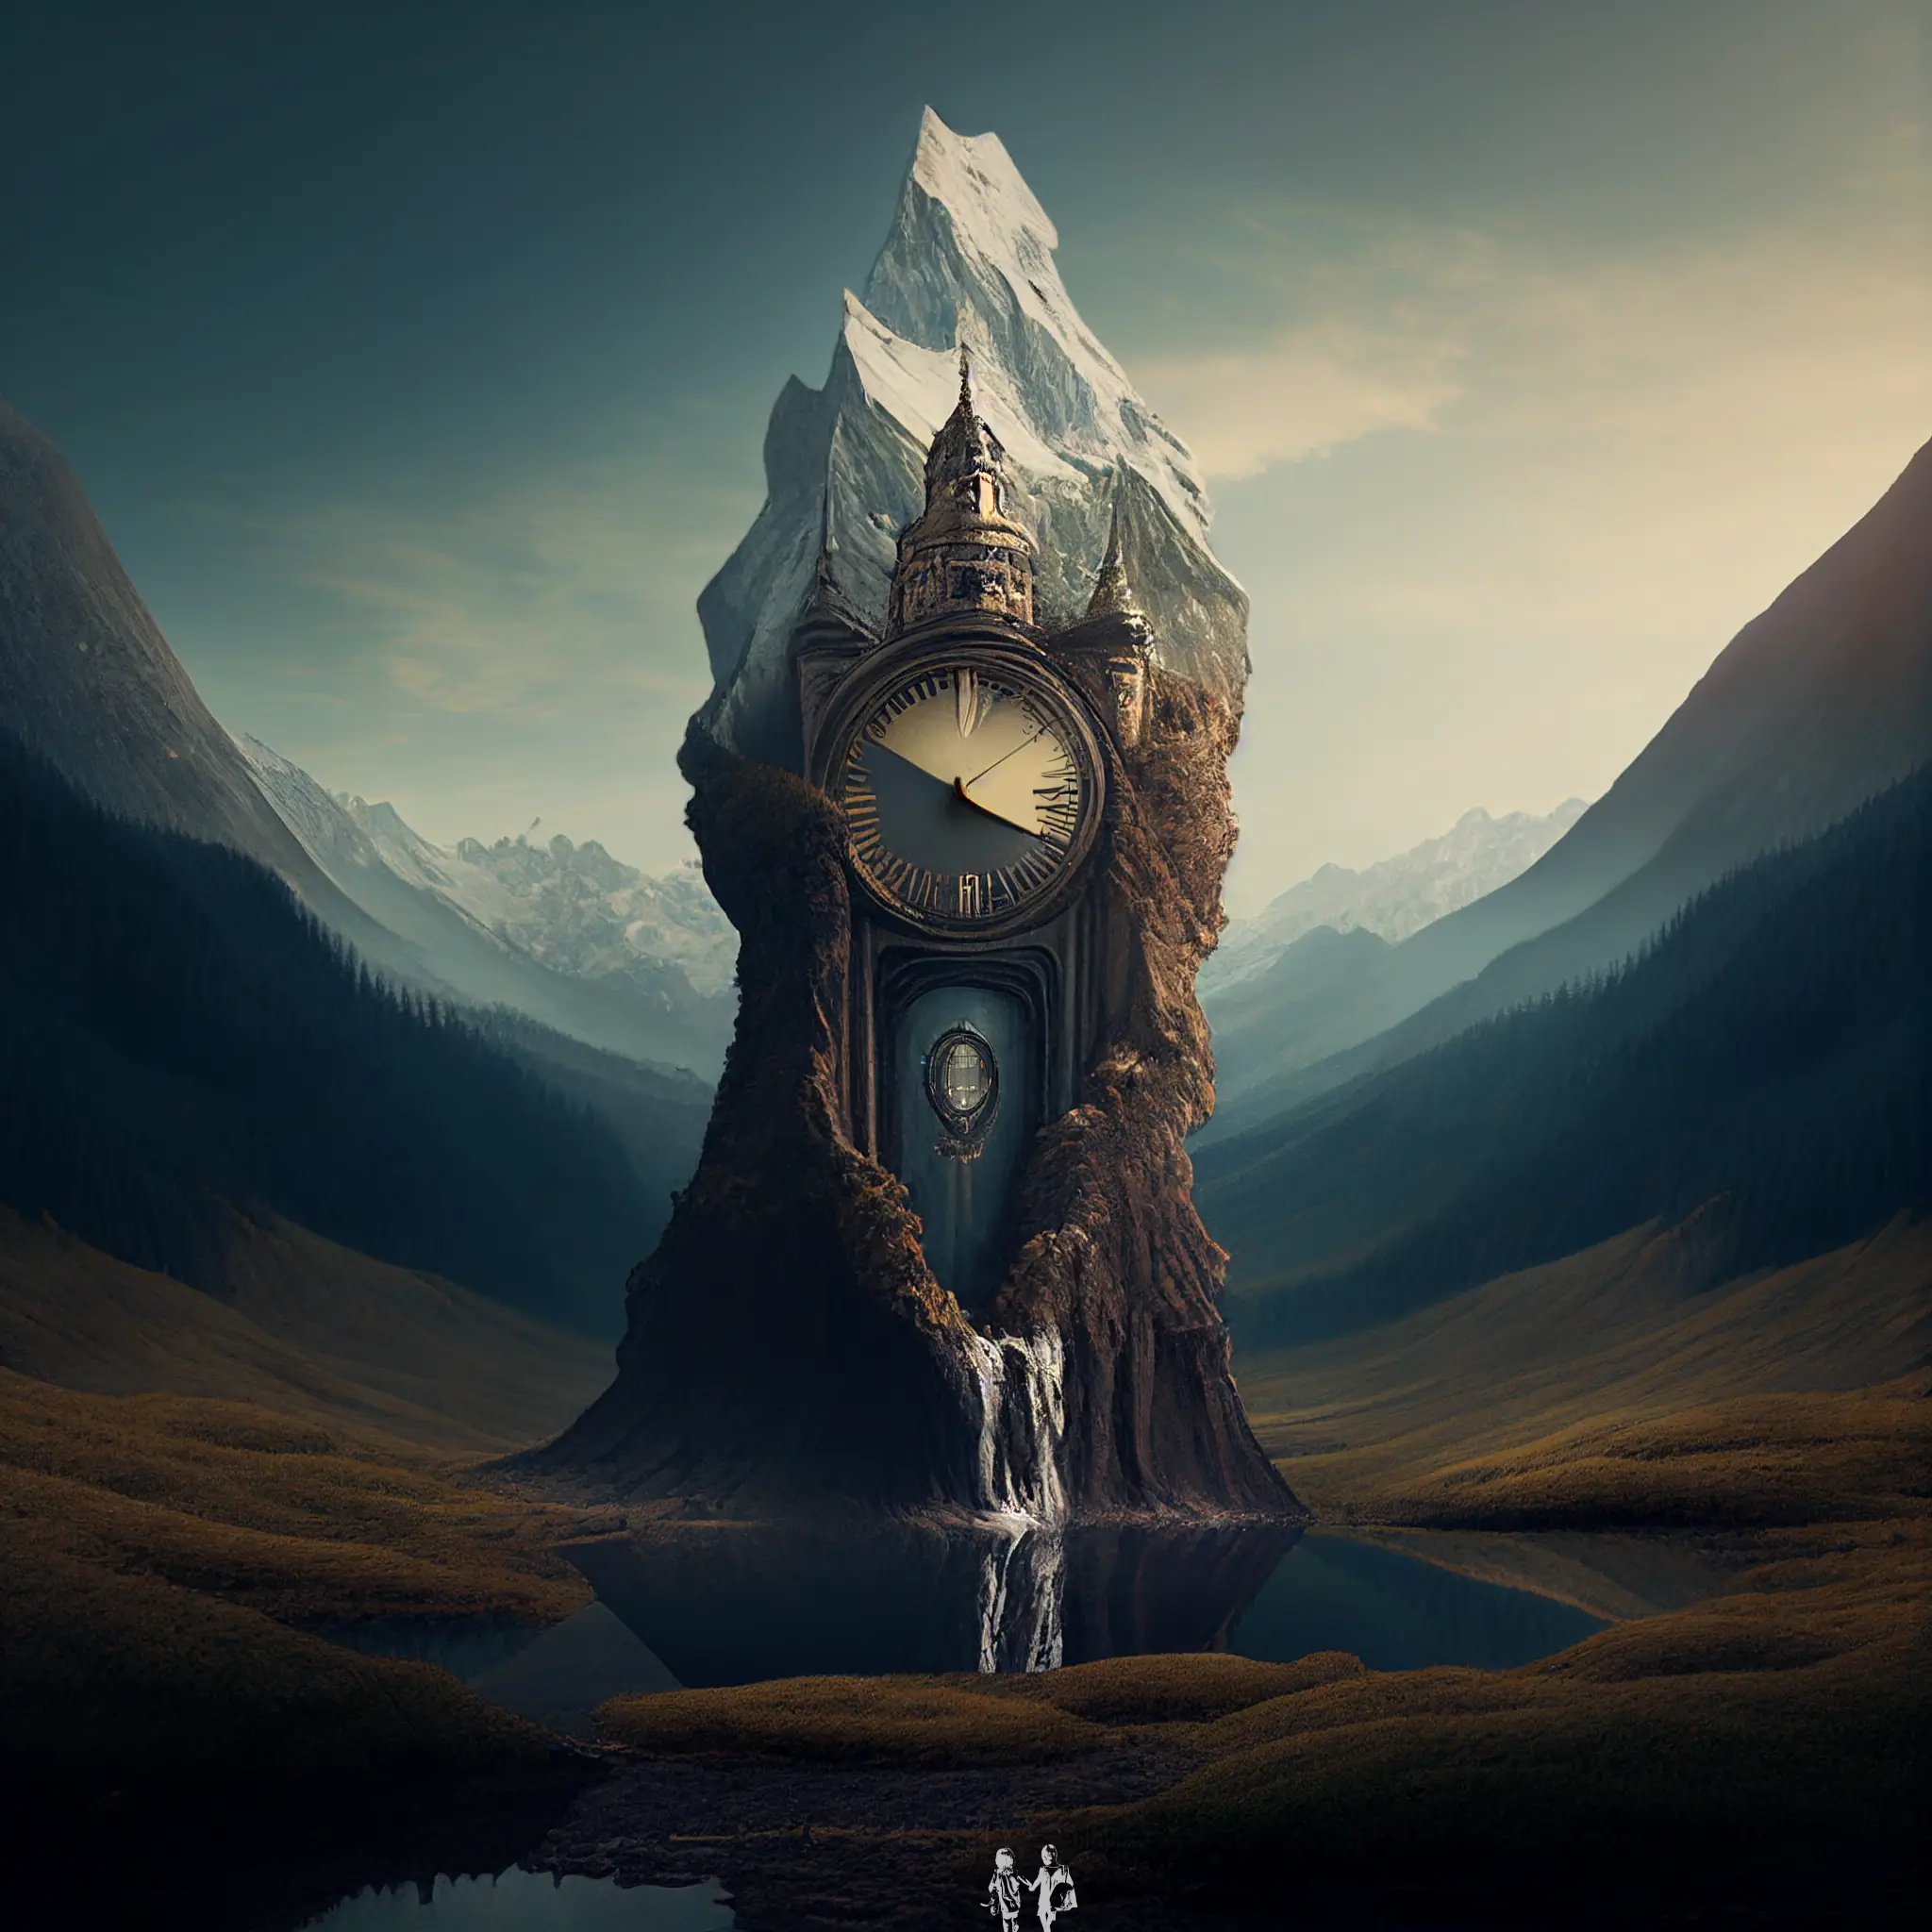 A lone mountain in a valley has grown around grandfather clock. There is a small waterfall spilling water into a pool at the clock mountain's bottom.